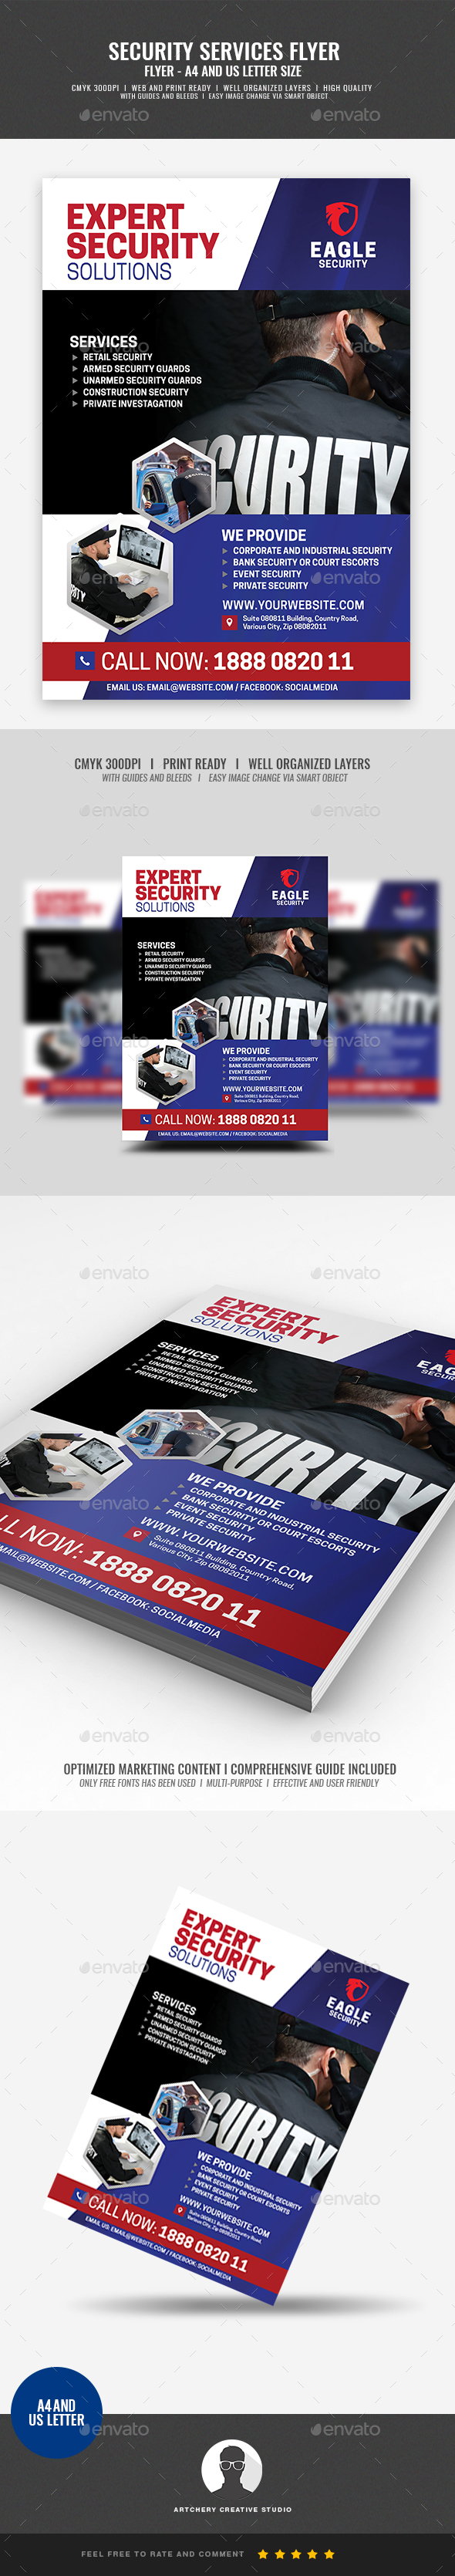 Security Services Promotional Flyer